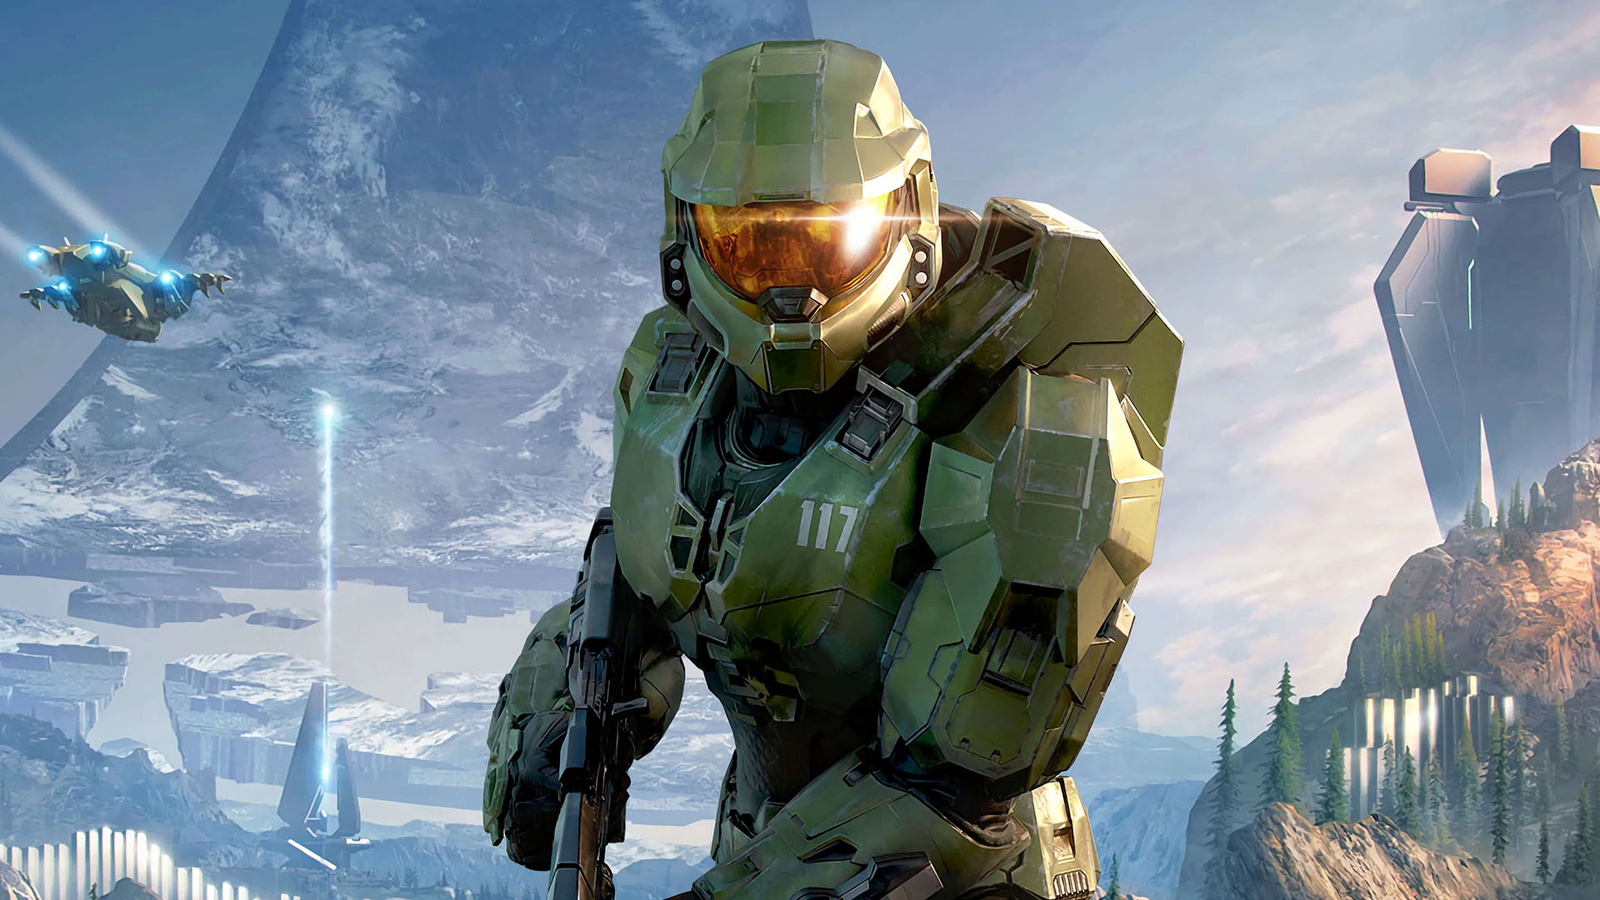 Halo franchise reportedly switching to Unreal Engine 5